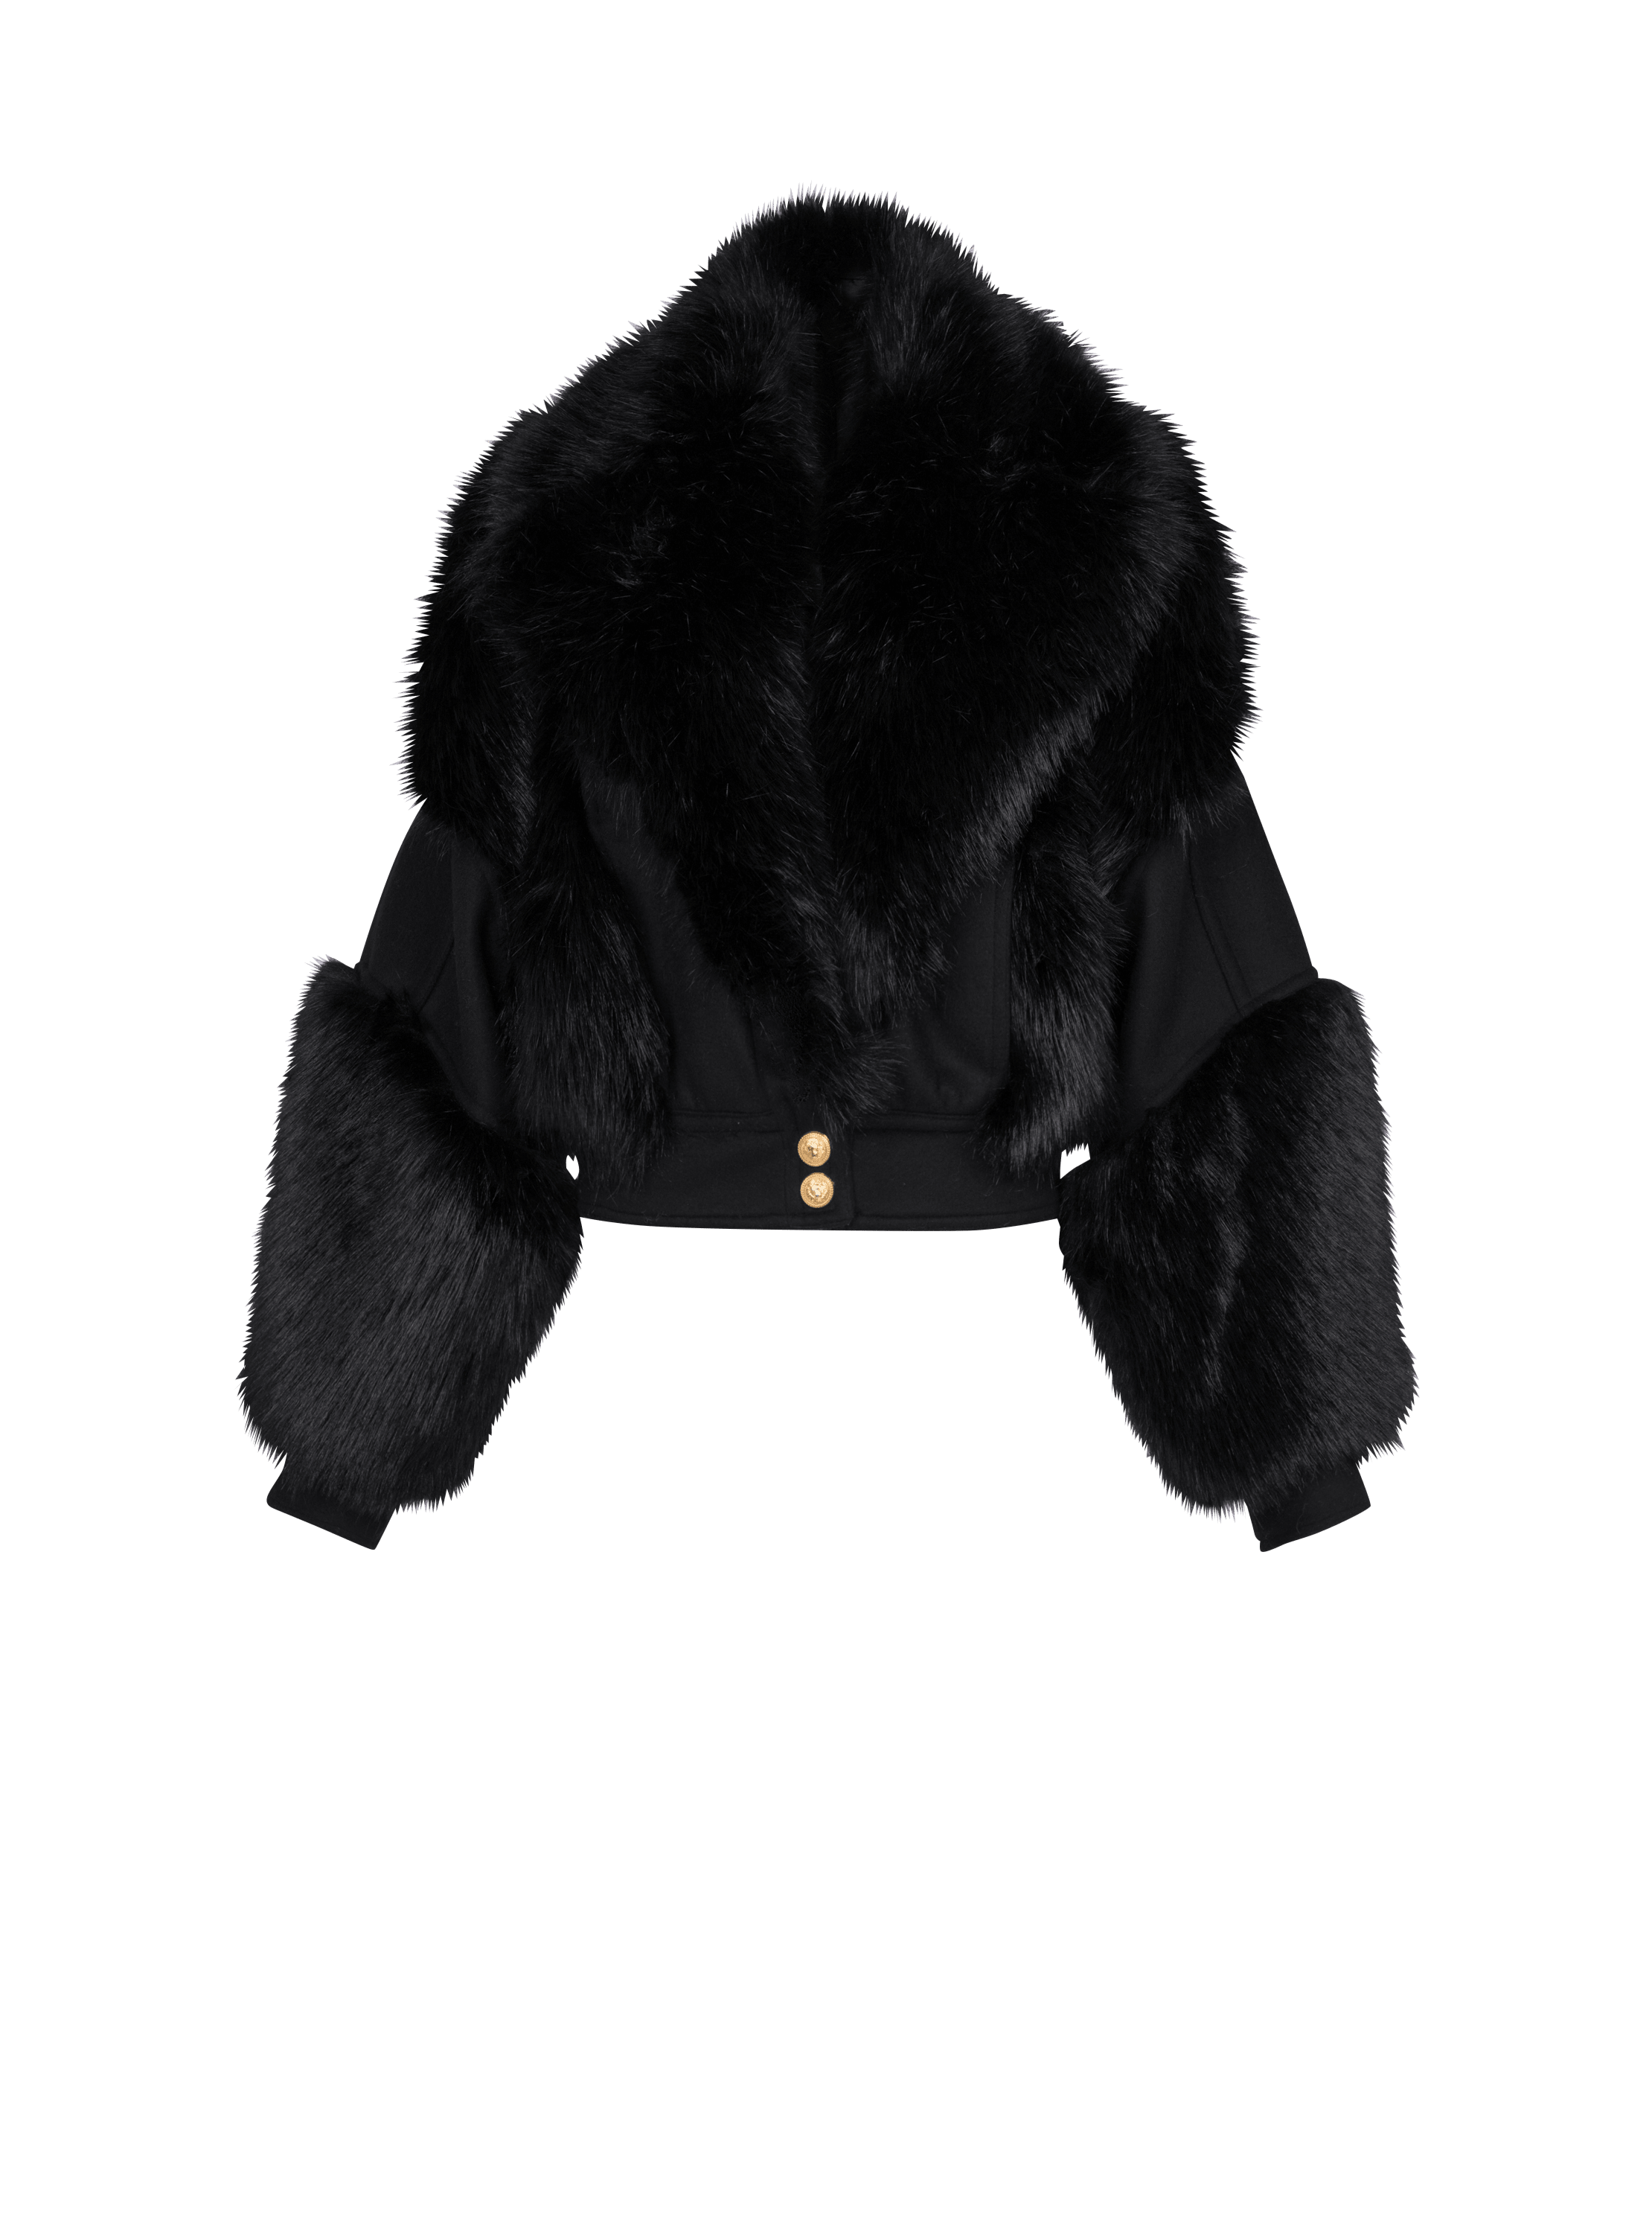 Wool and faux fur jacket